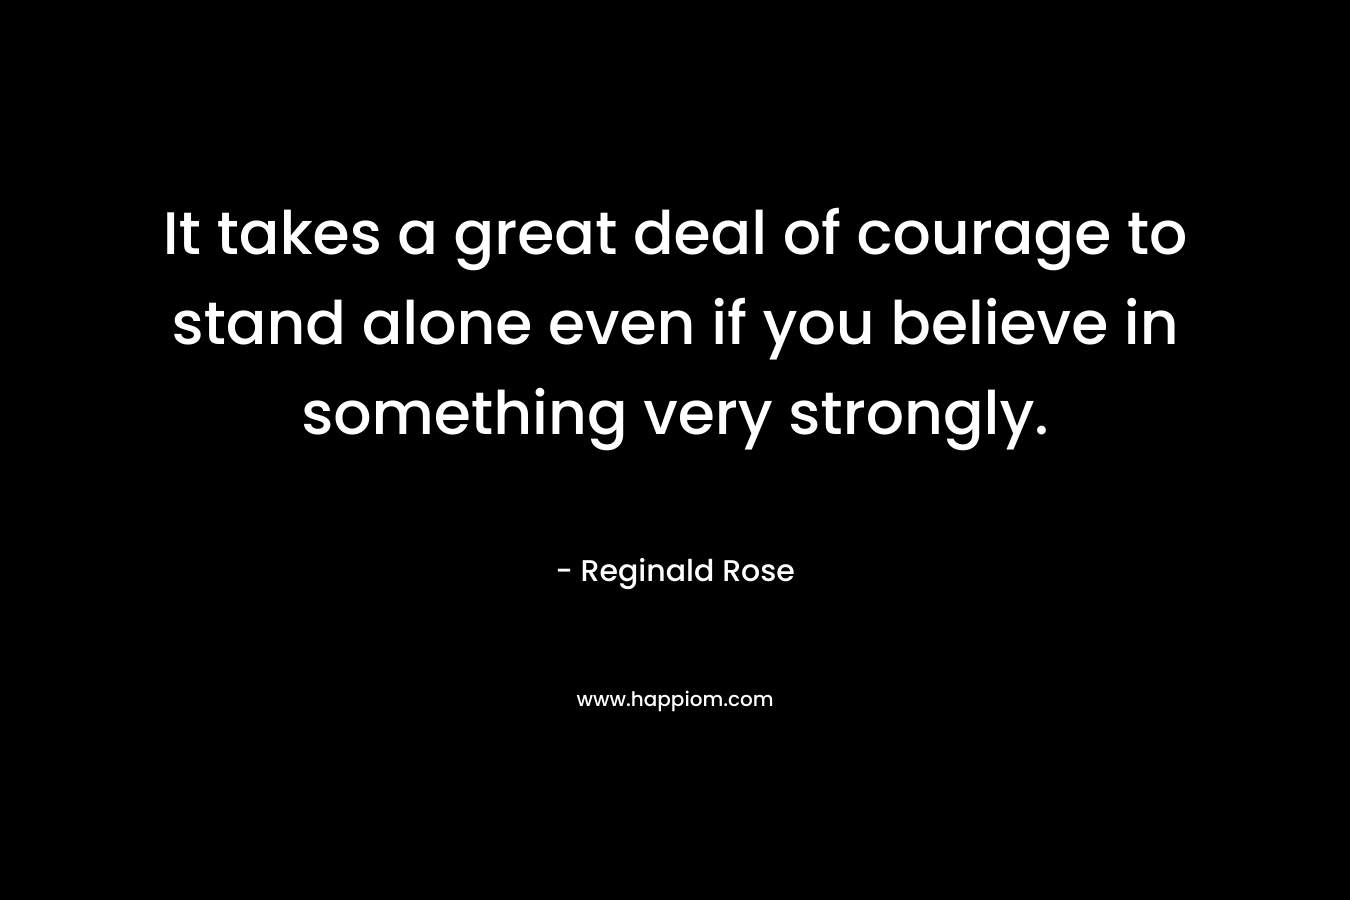 It takes a great deal of courage to stand alone even if you believe in something very strongly.